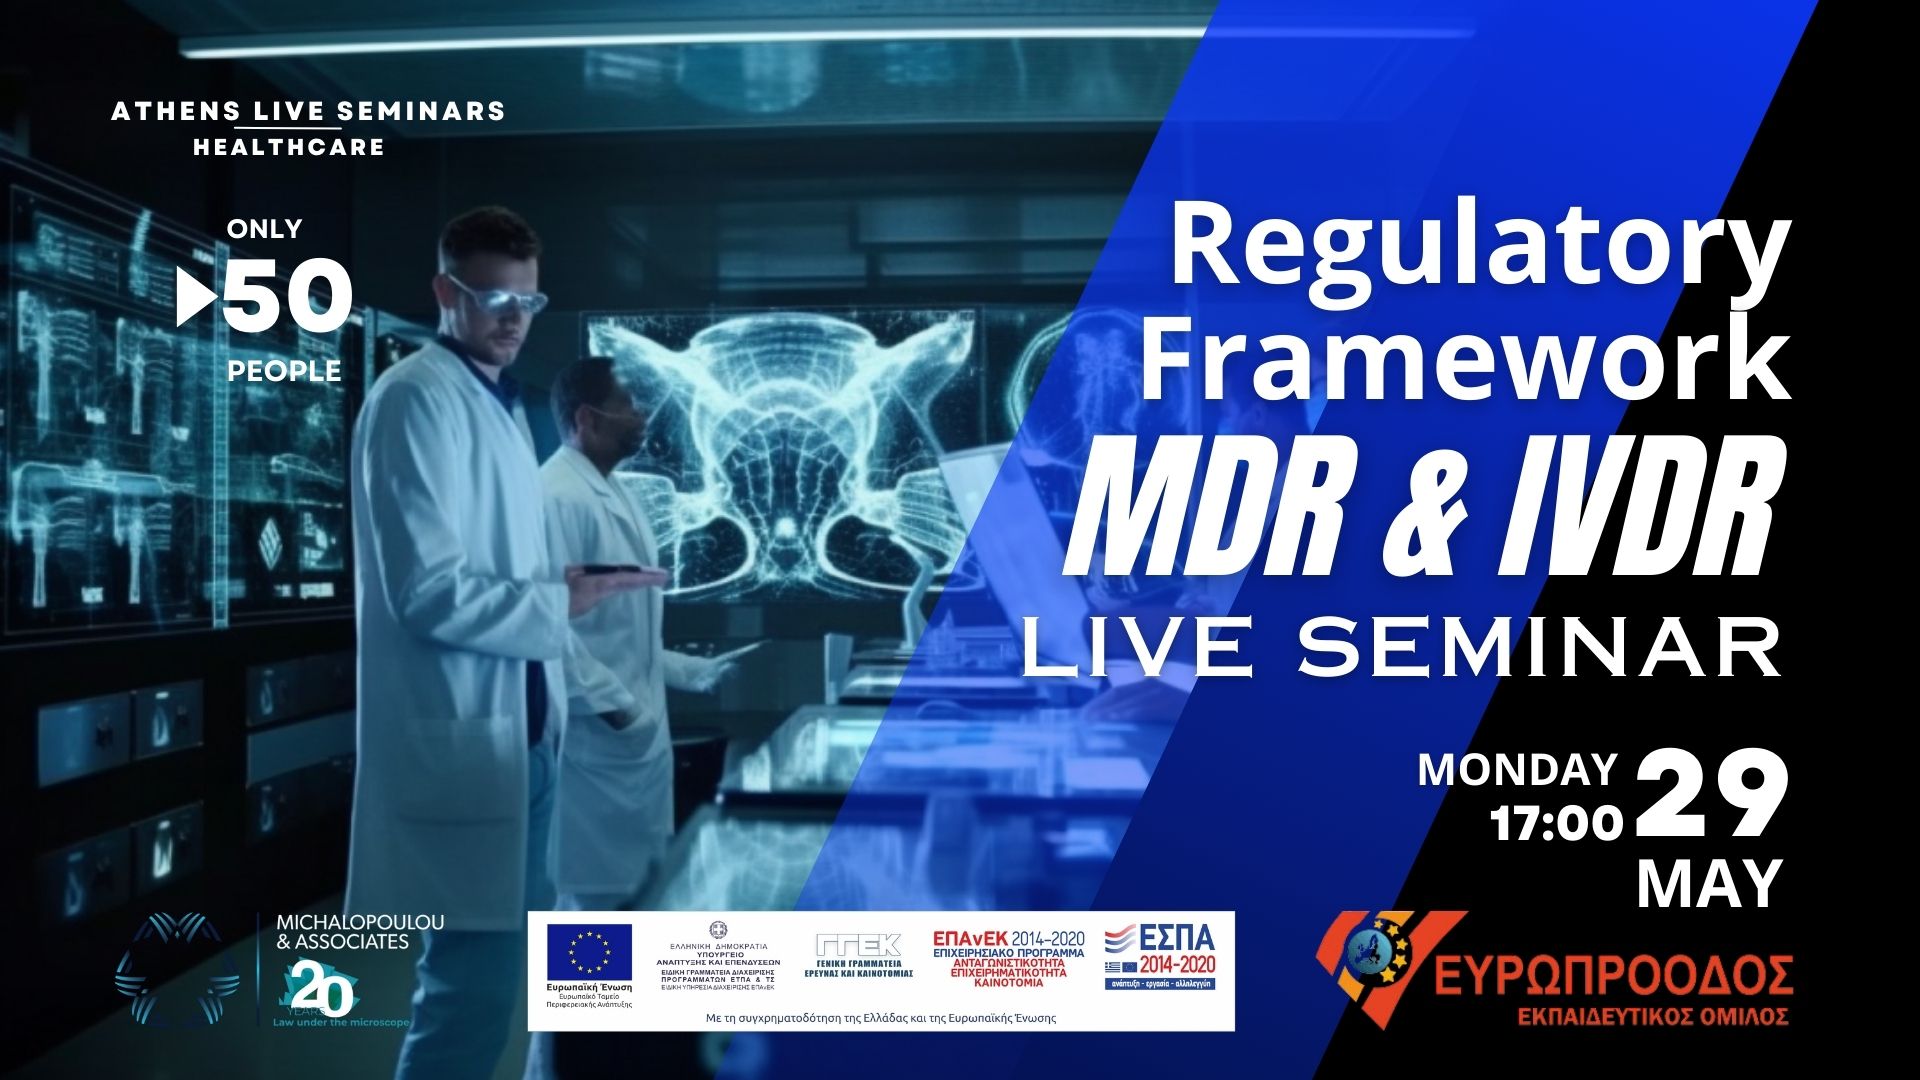 Join Our Live Seminar on MDR & IVDR Medical Device and Drug Regulatory Framework and AI ACT Update